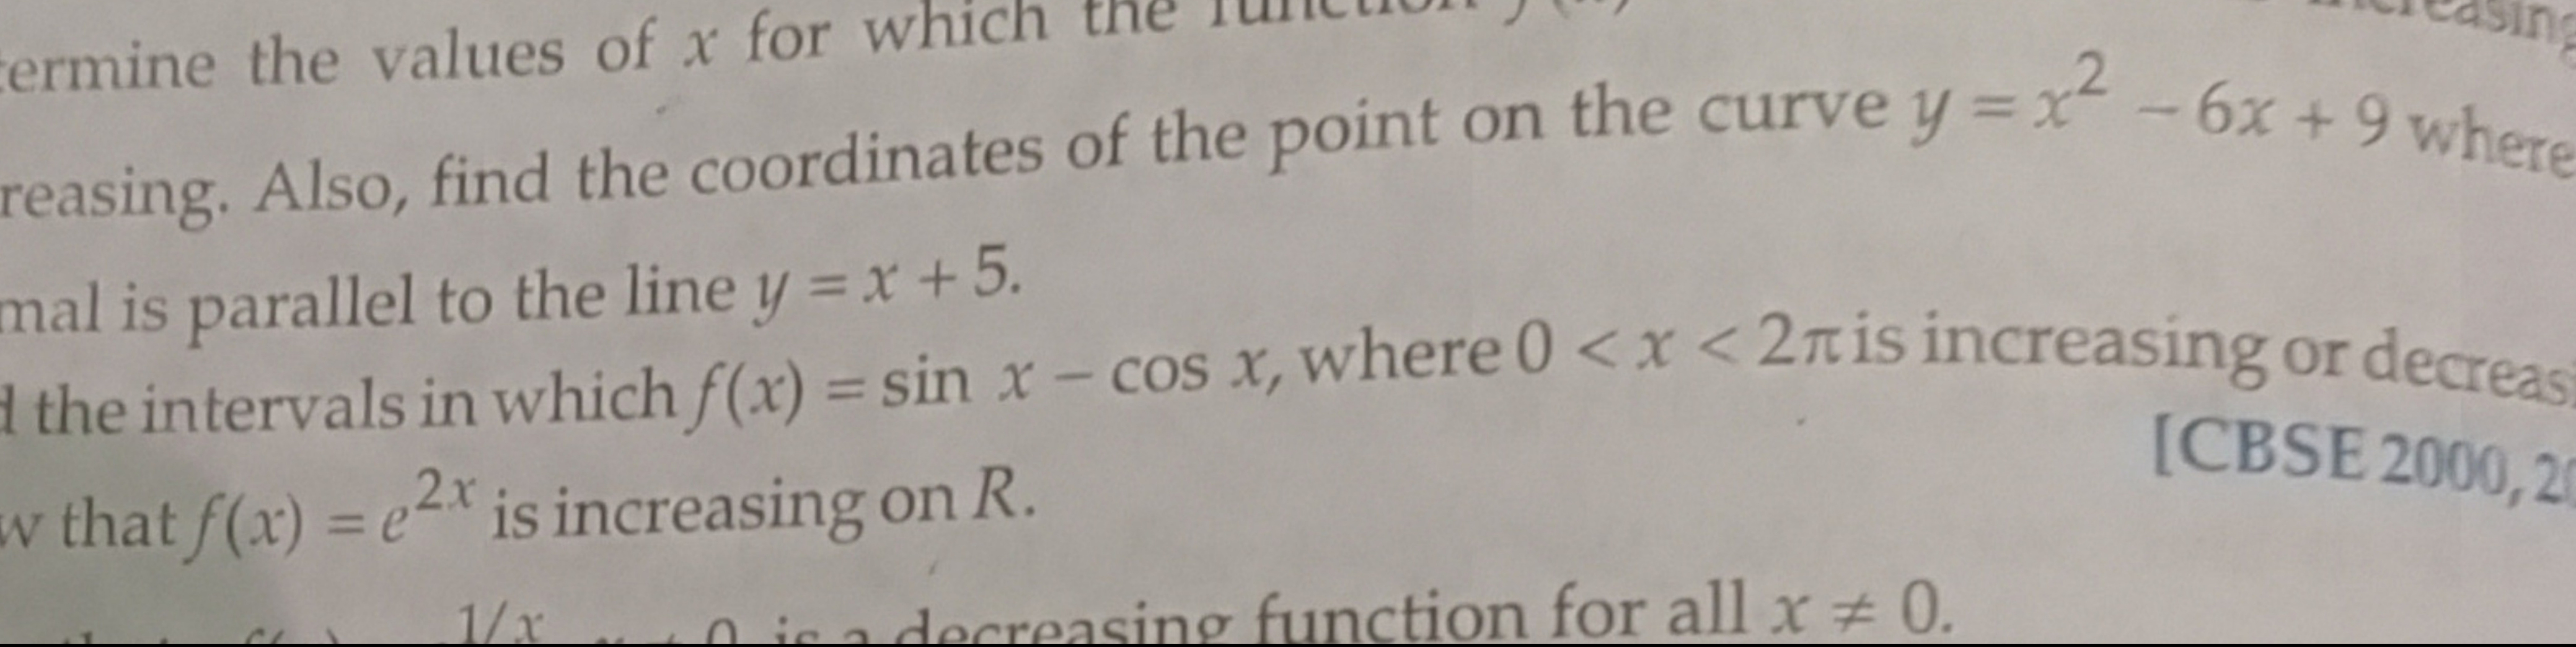 ermine the values of x for which
reasing. Also, find the coordinates o